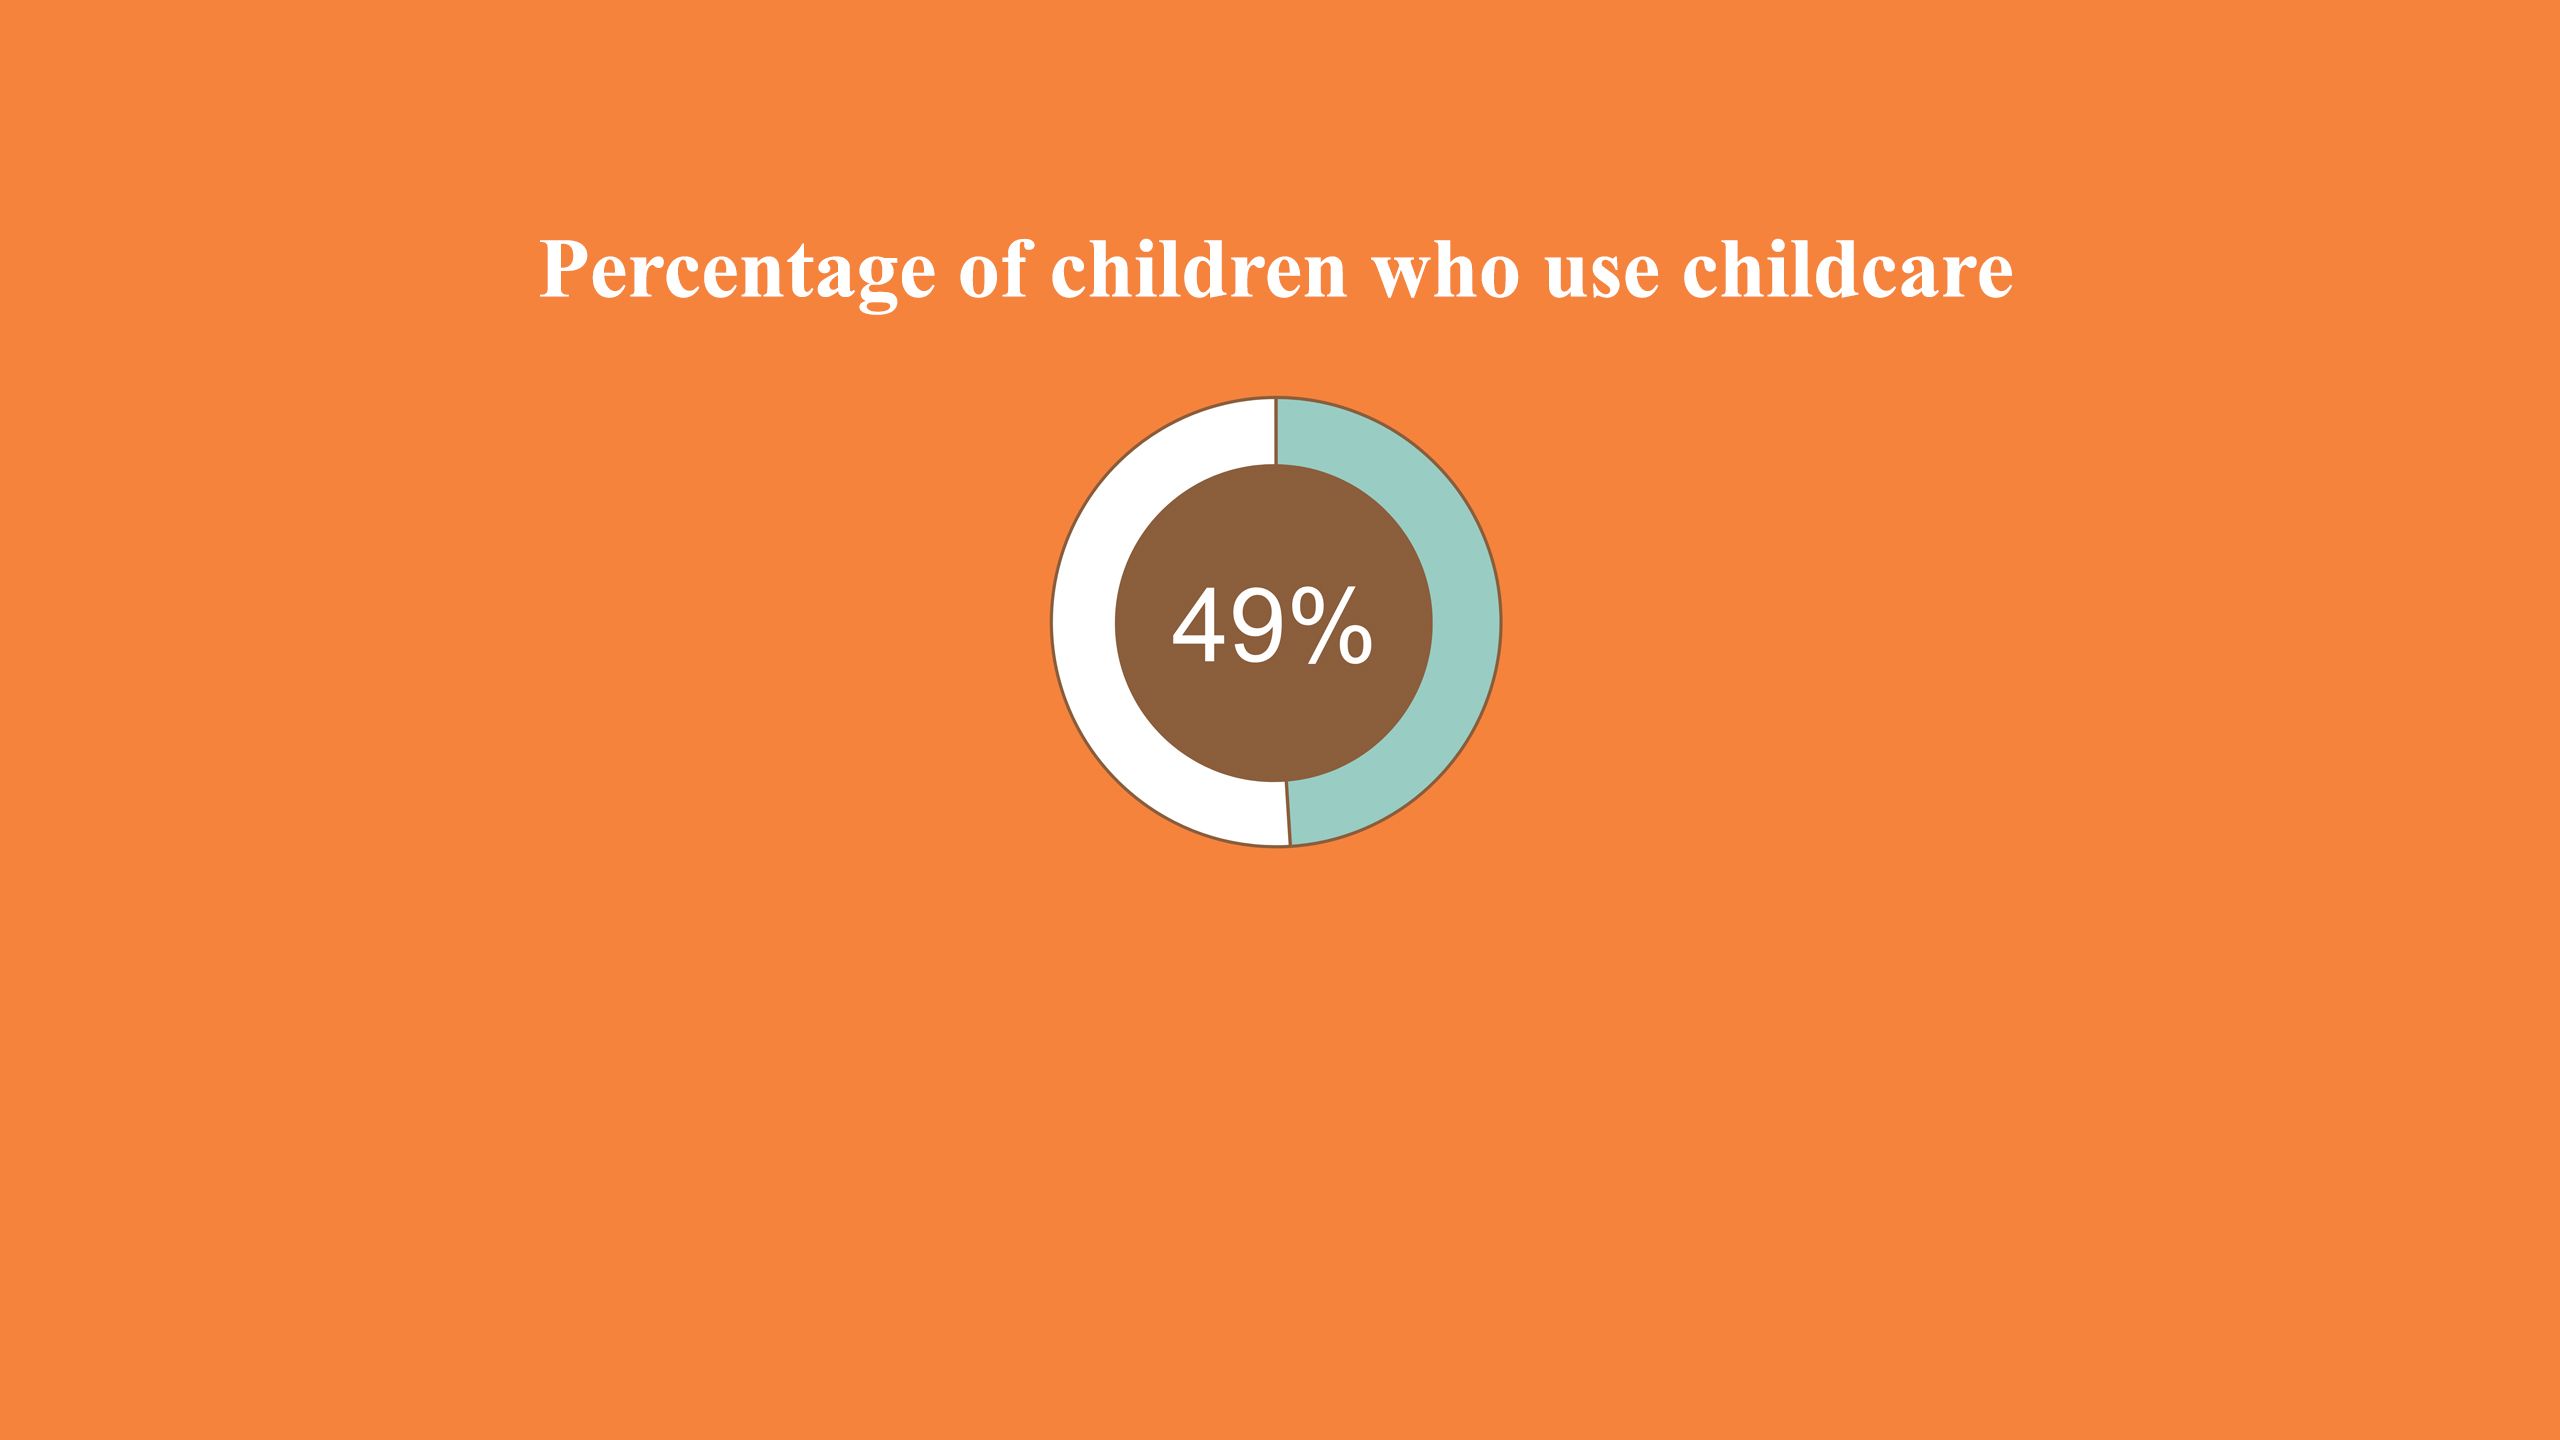 Percentage of children who use childcare - 49%